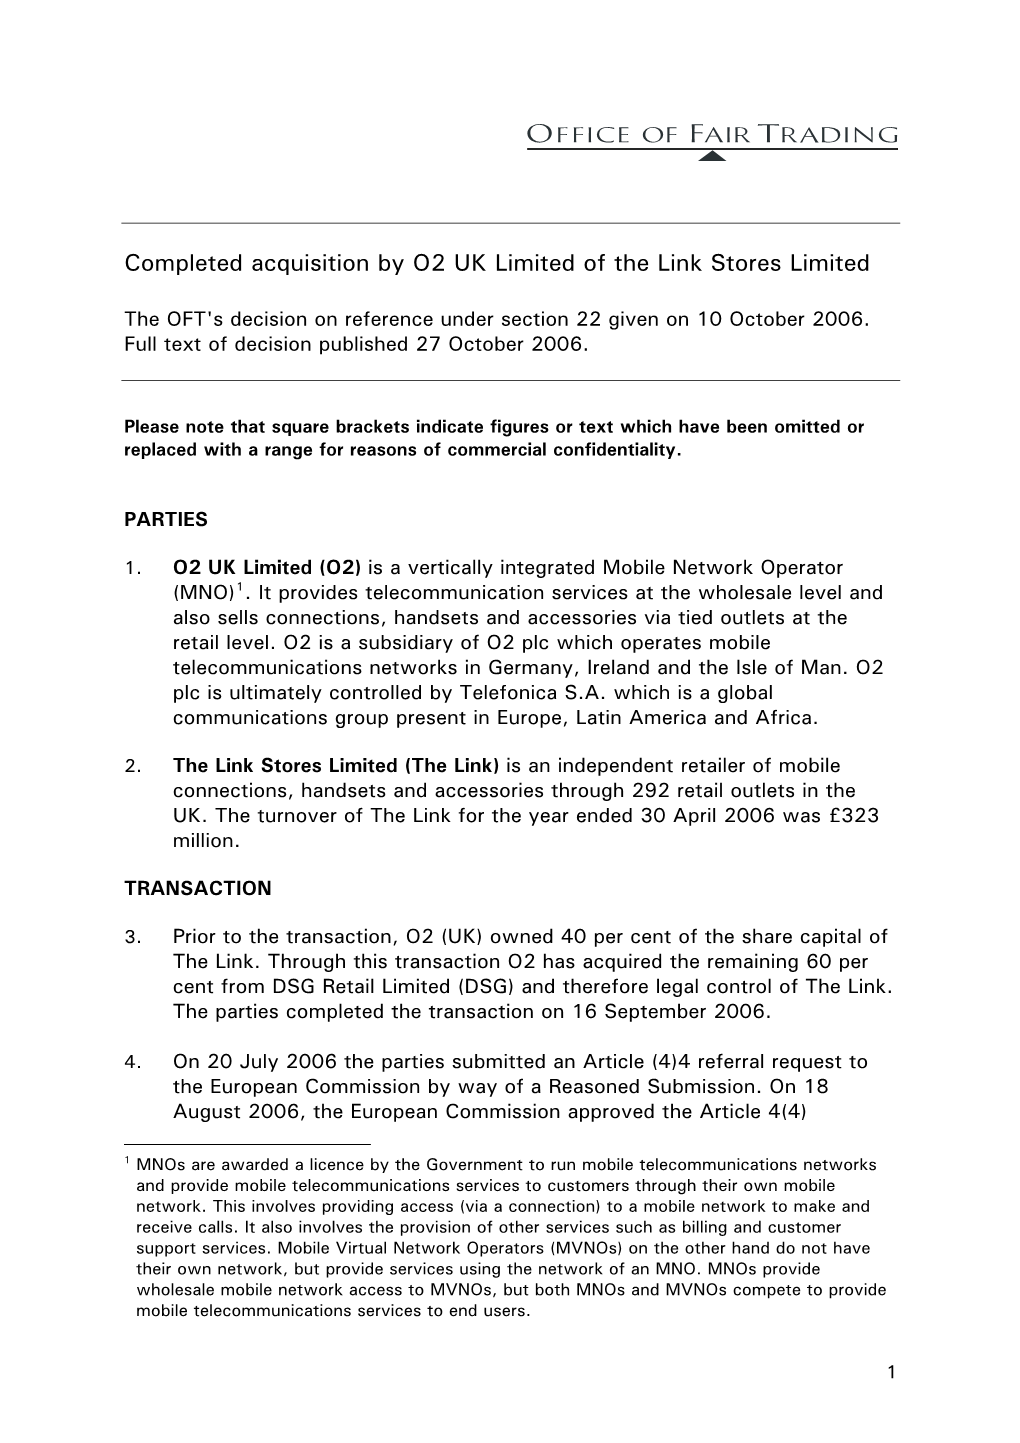 Completed Acquisition by O2 UK Limited of the Link Stores Limited